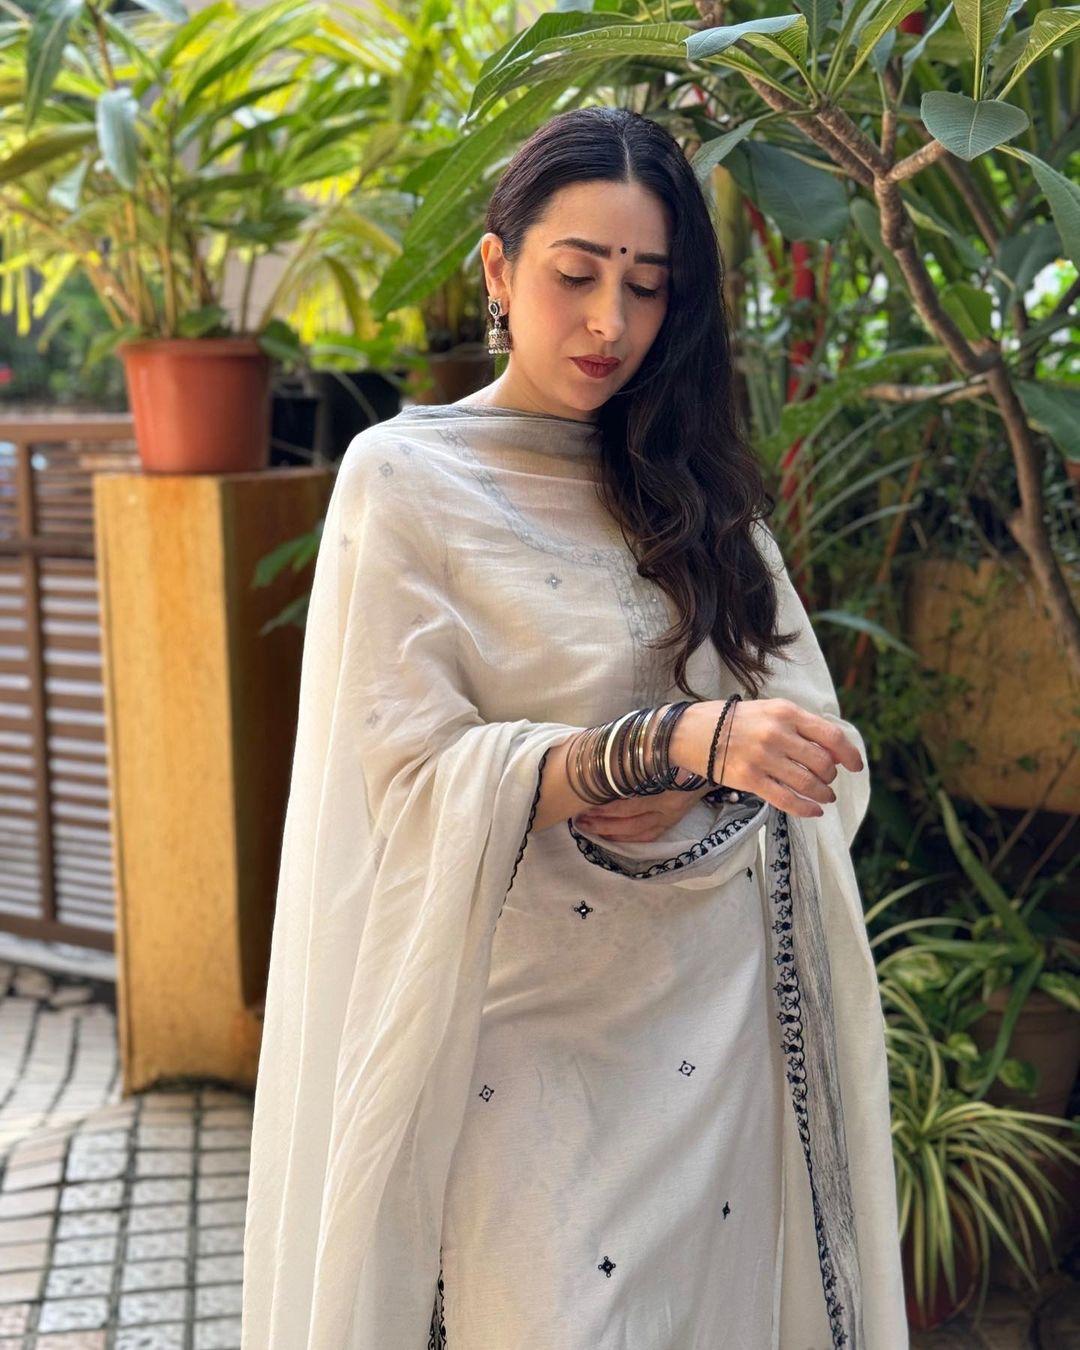 Sasthi On Sastami, you can don this Karisma Kapoor look. This white salwar set is the perfect outfit for the occasion, combining tradition with modern flair. 